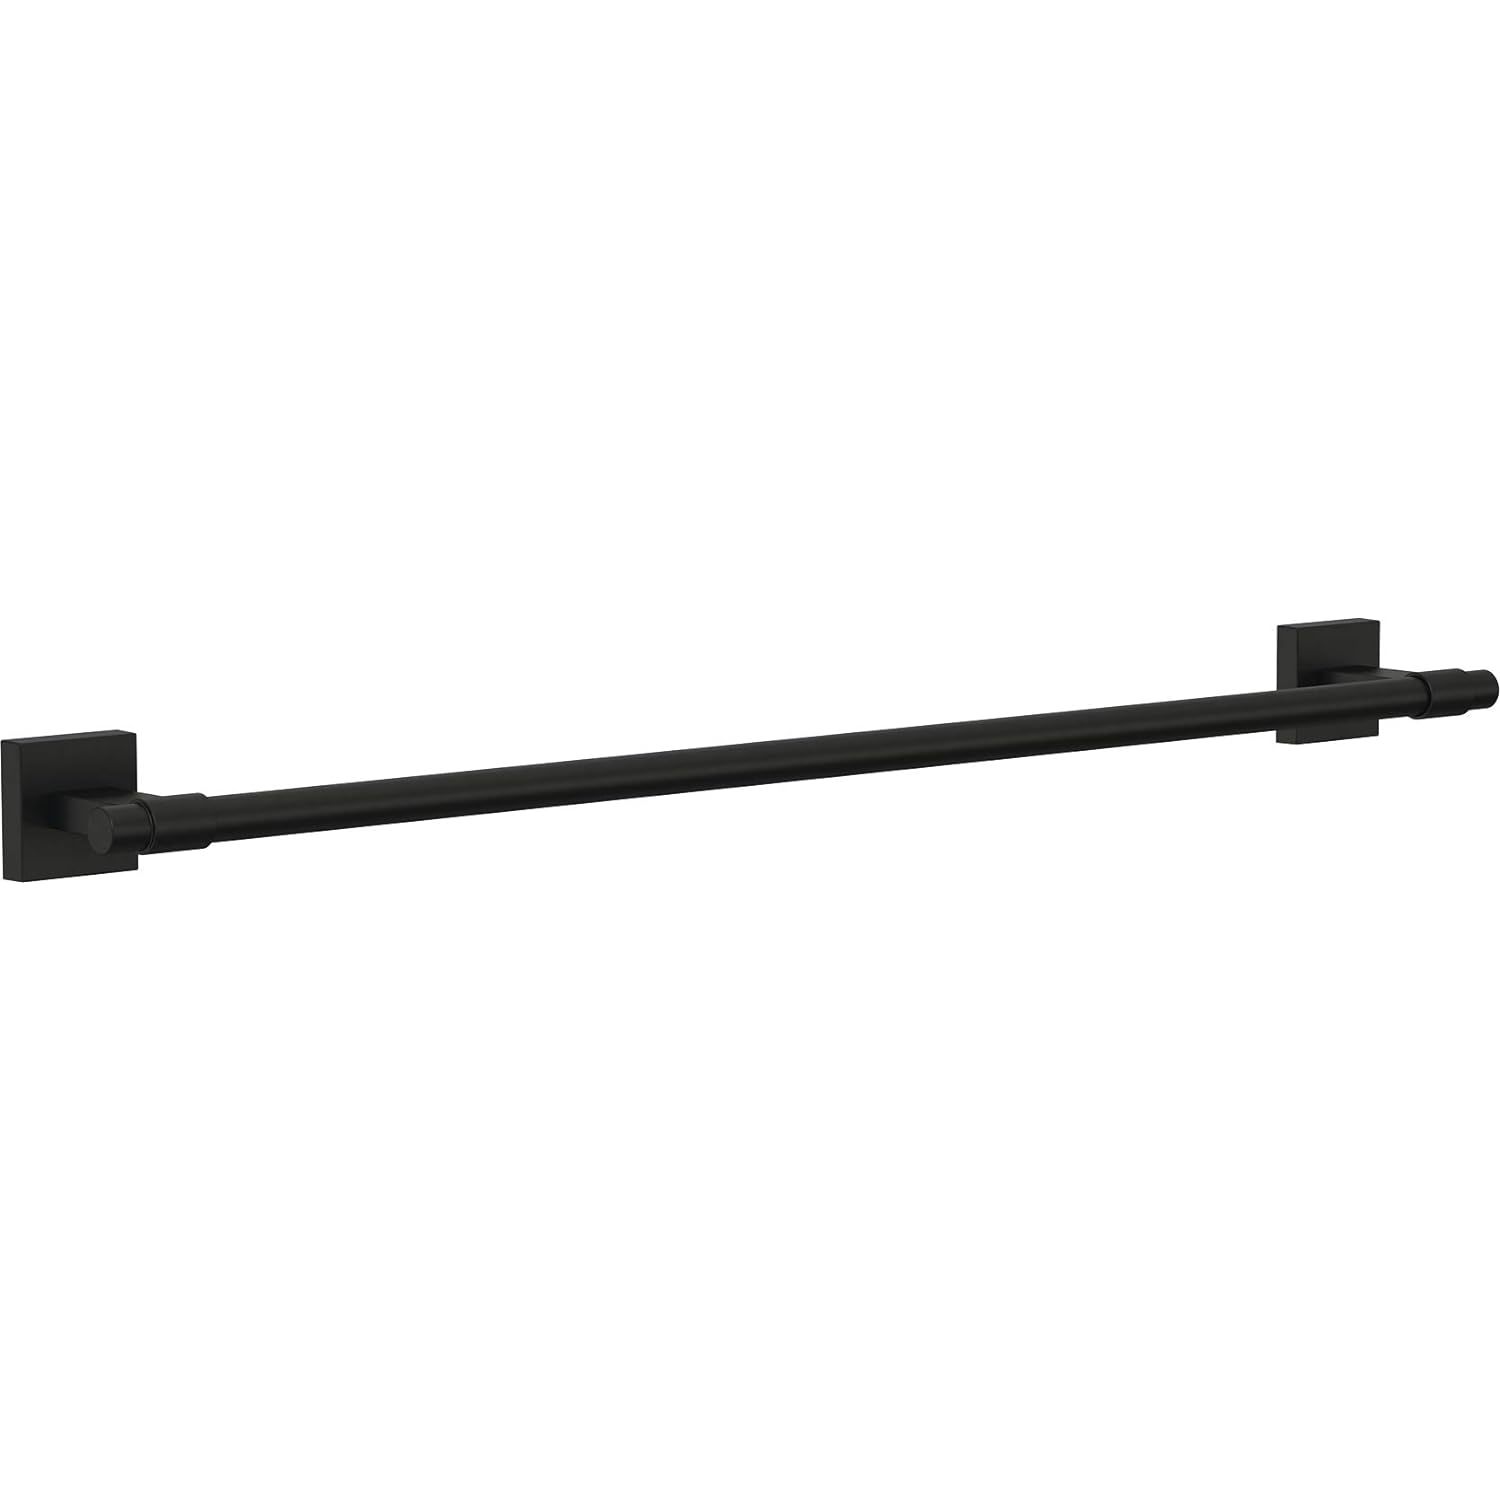 Primary image for Franklin Brass Maxted 24 inch -towel Bar, Matte Black, -bathroom Accessories, MA